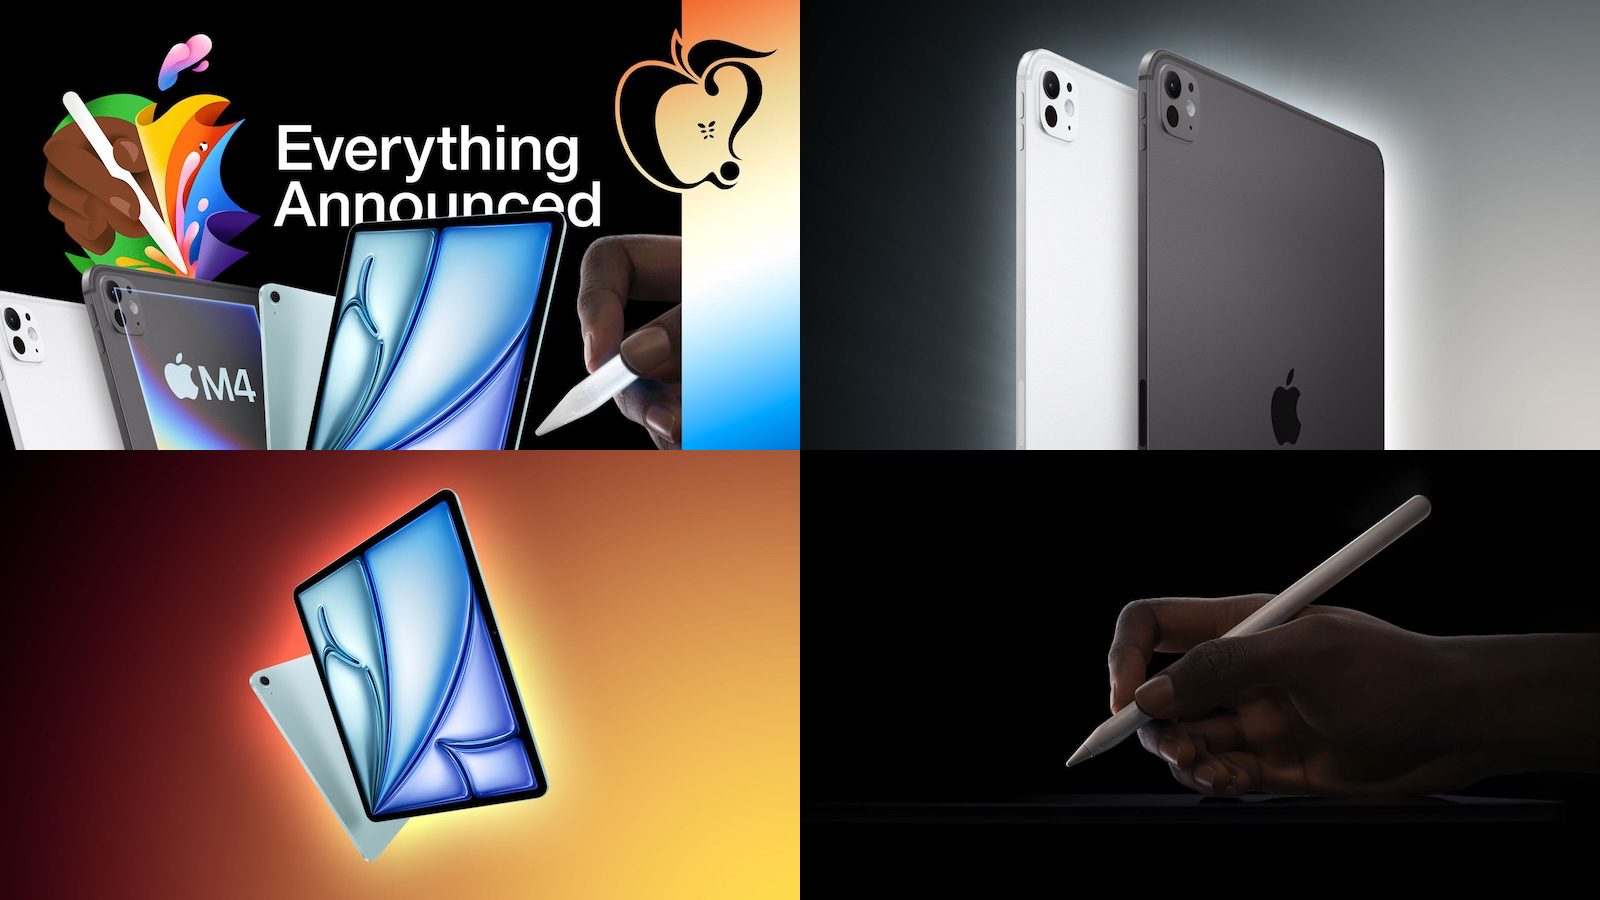 Top Stories: Apple Event With New iPads, Apple Pencil Pro, and More